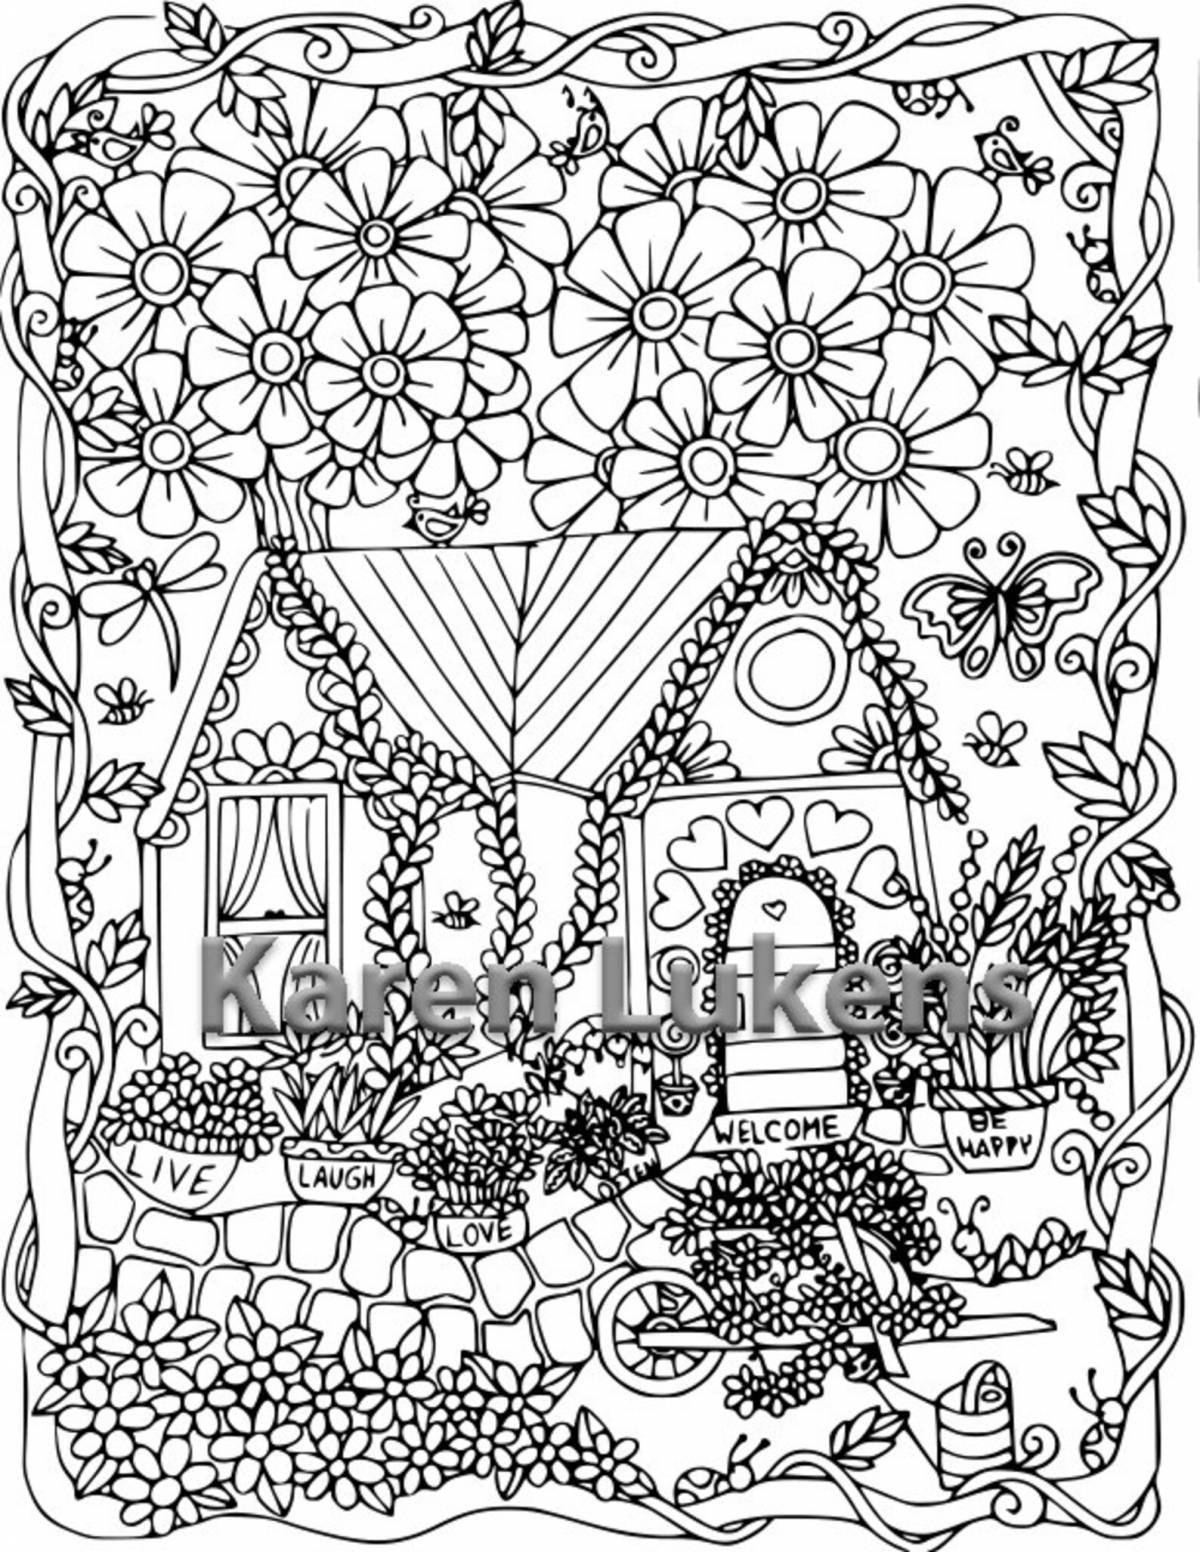 Exciting garden coloring page